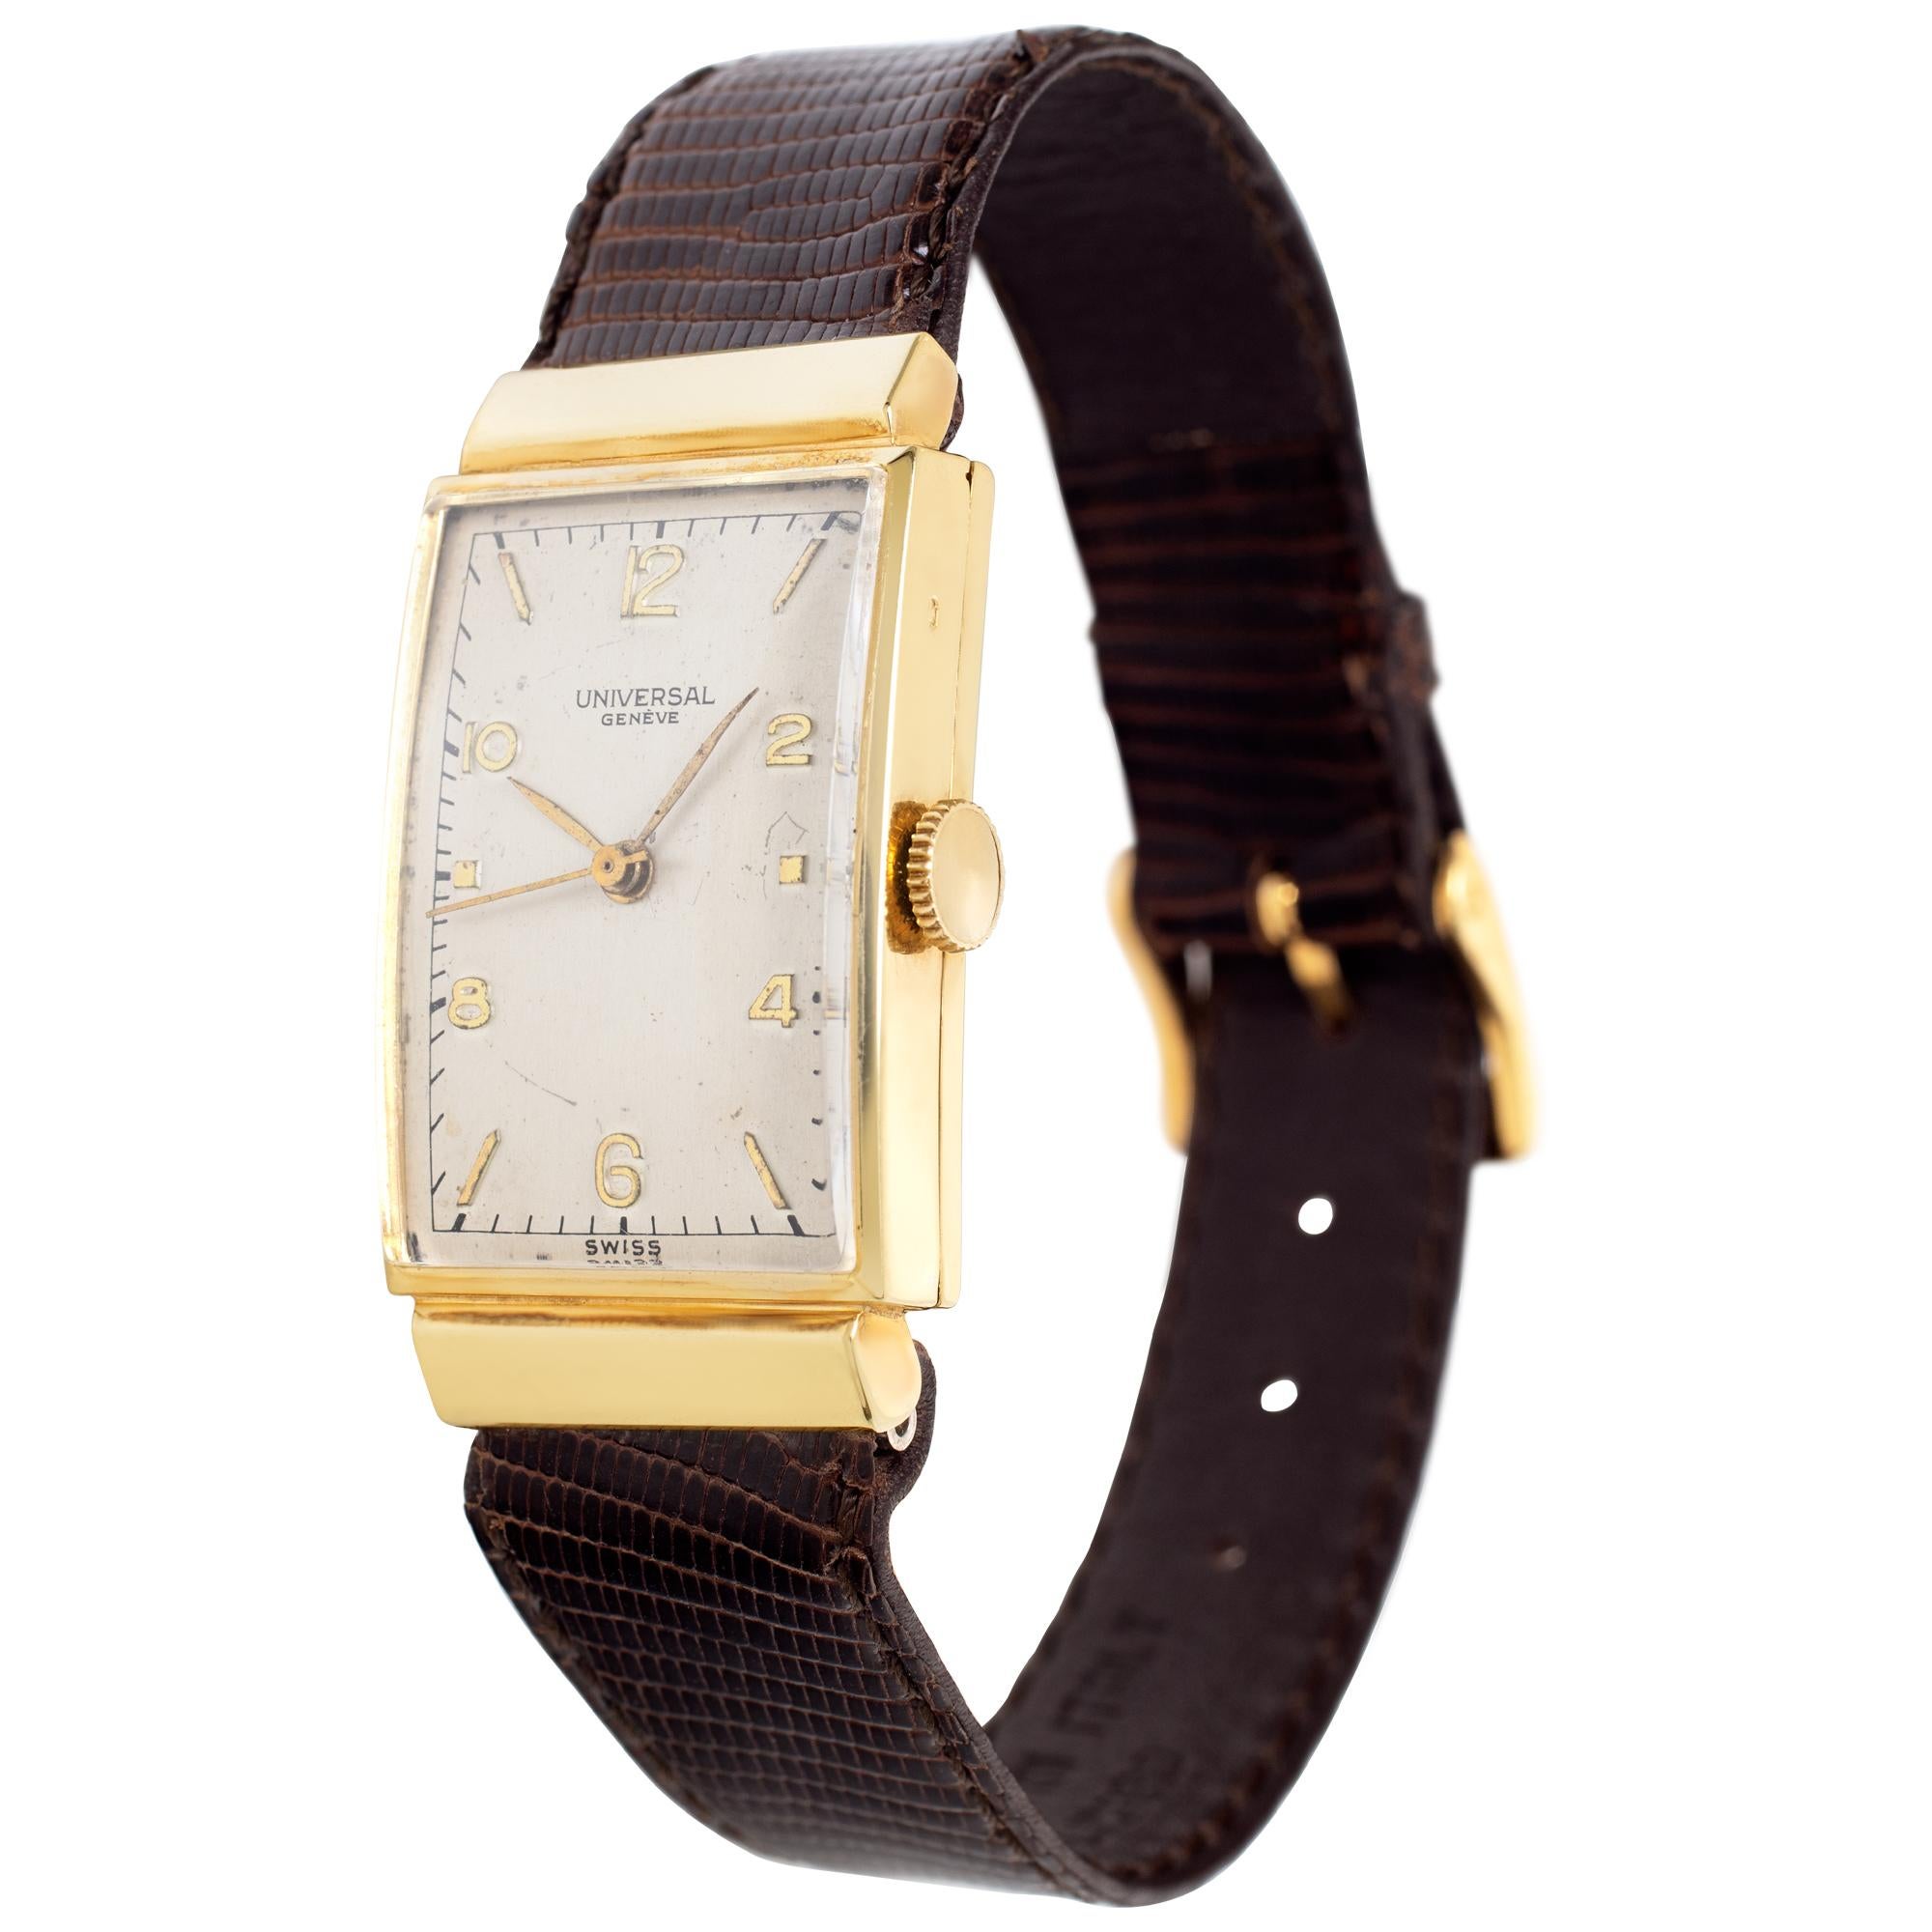 Vintage Universal Geneve manual wind watch in 14k yellow gold 21mm on a leather strap with cream stick/arabic numeral dial and sweep second hand. Ref 58927. Fine Pre-owned Universal Geneve Watch. Certified preowned Vintage Universal Geneve 58927